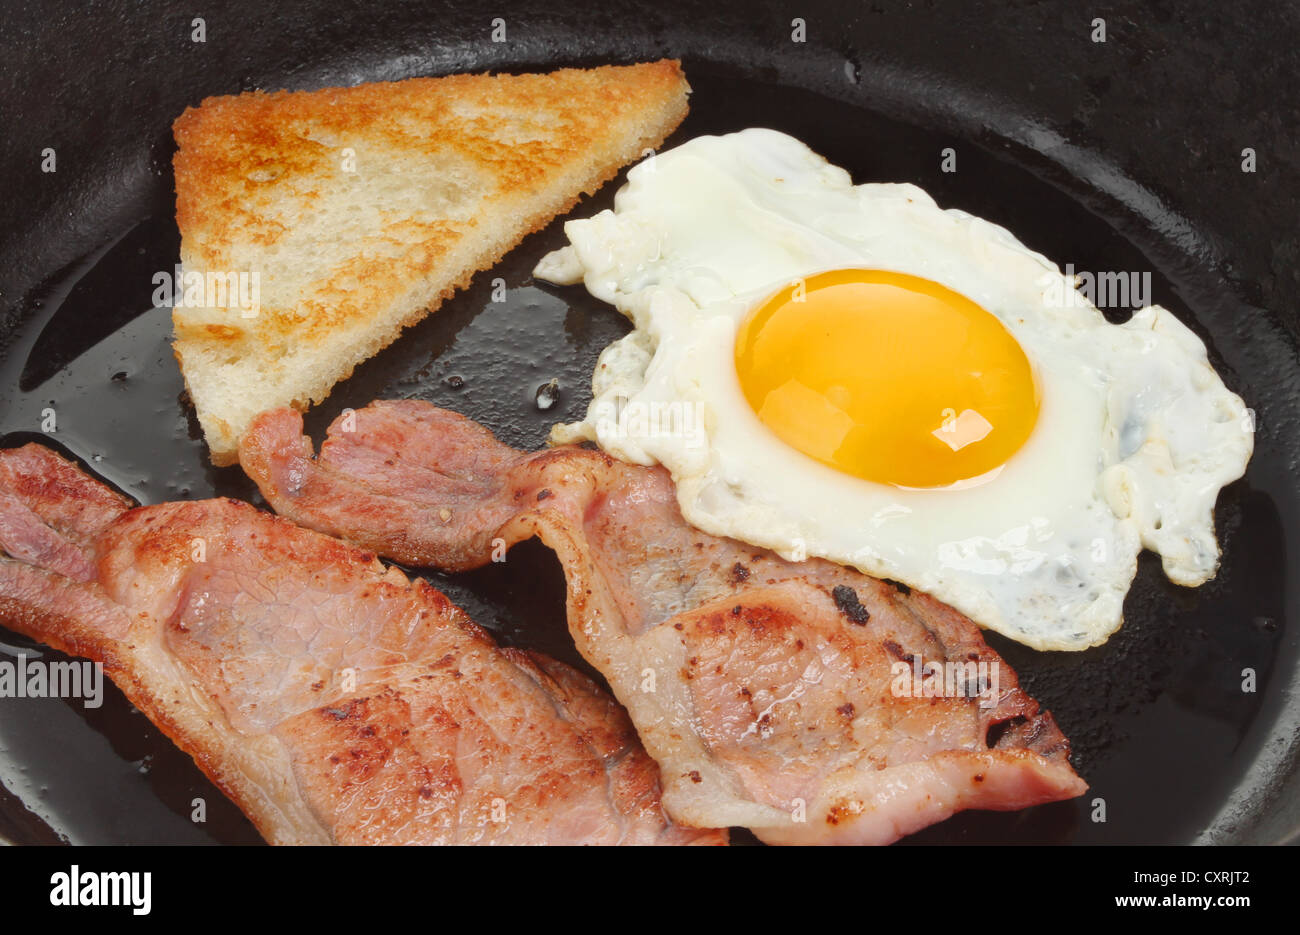 Closeup of fried egg, bread and bacon in a frying pan Stock Photo